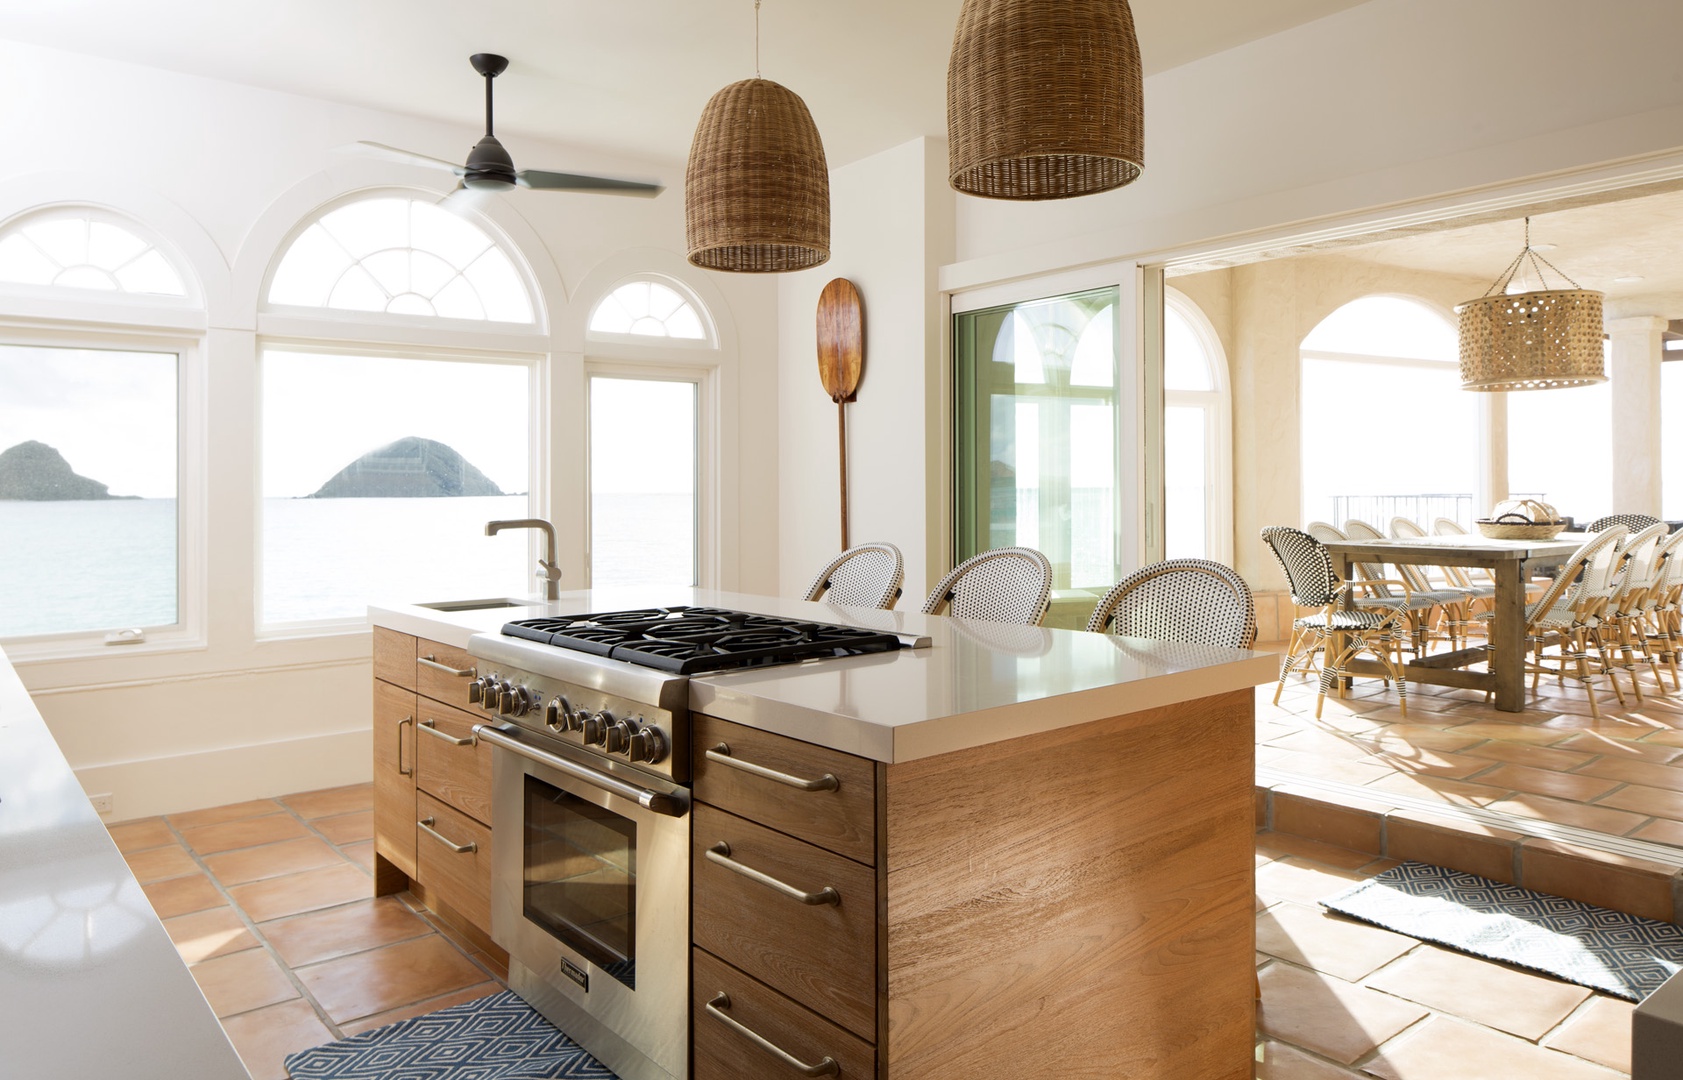 Kailua Vacation Rentals, Lanikai Village* - The Villa at Wailea Point: Modern and classic styles meet in this kitchen with a view.